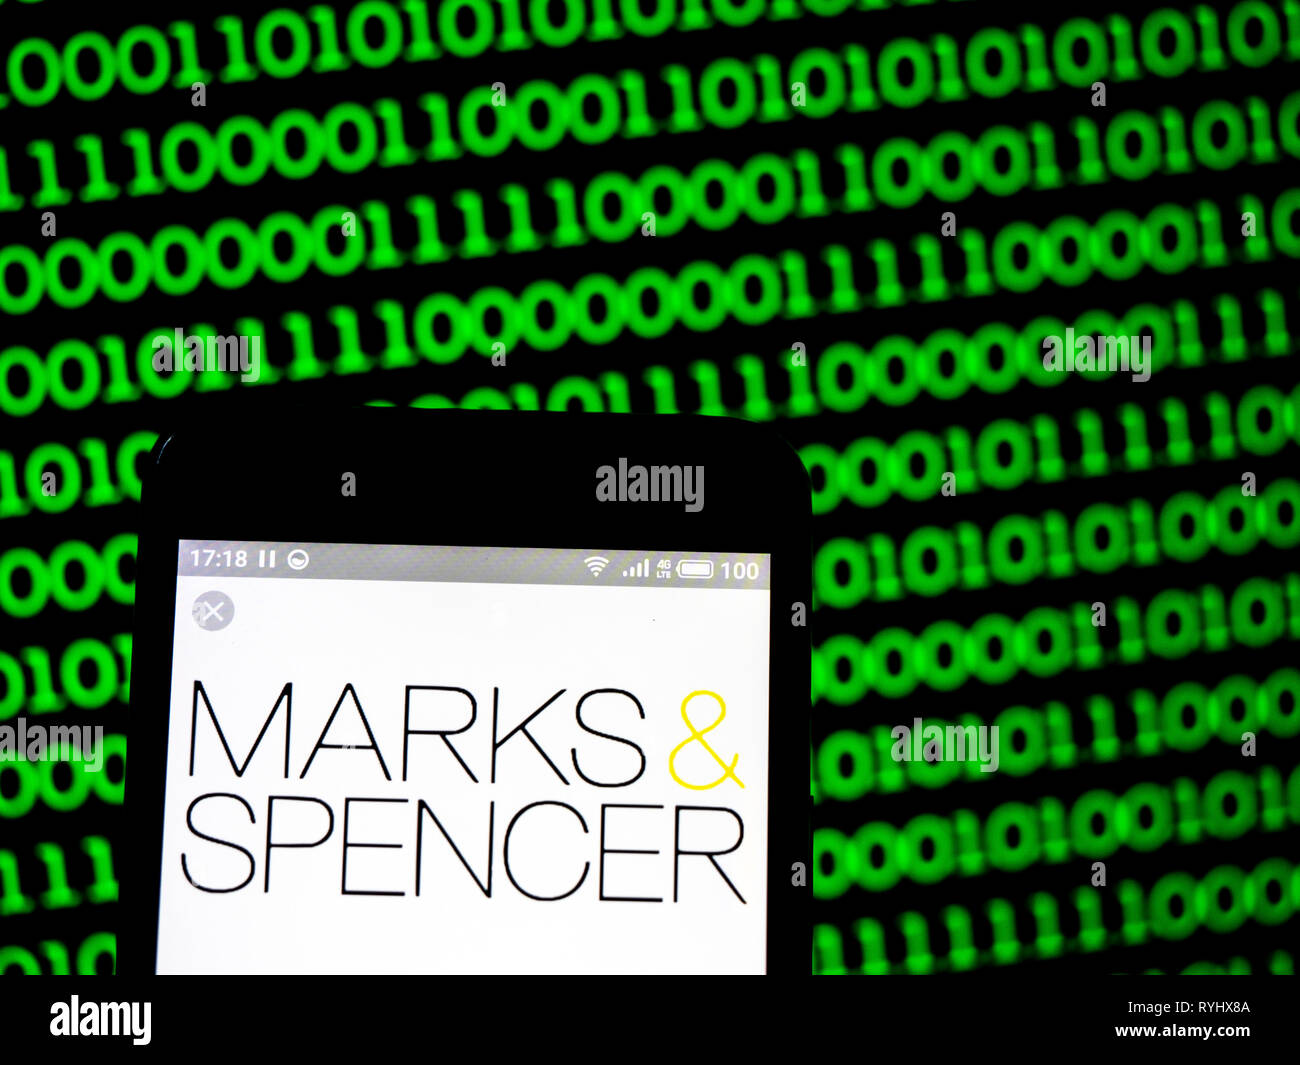 Marks & Spencer Group plc company logo seen displayed on smart phone. Stock Photo